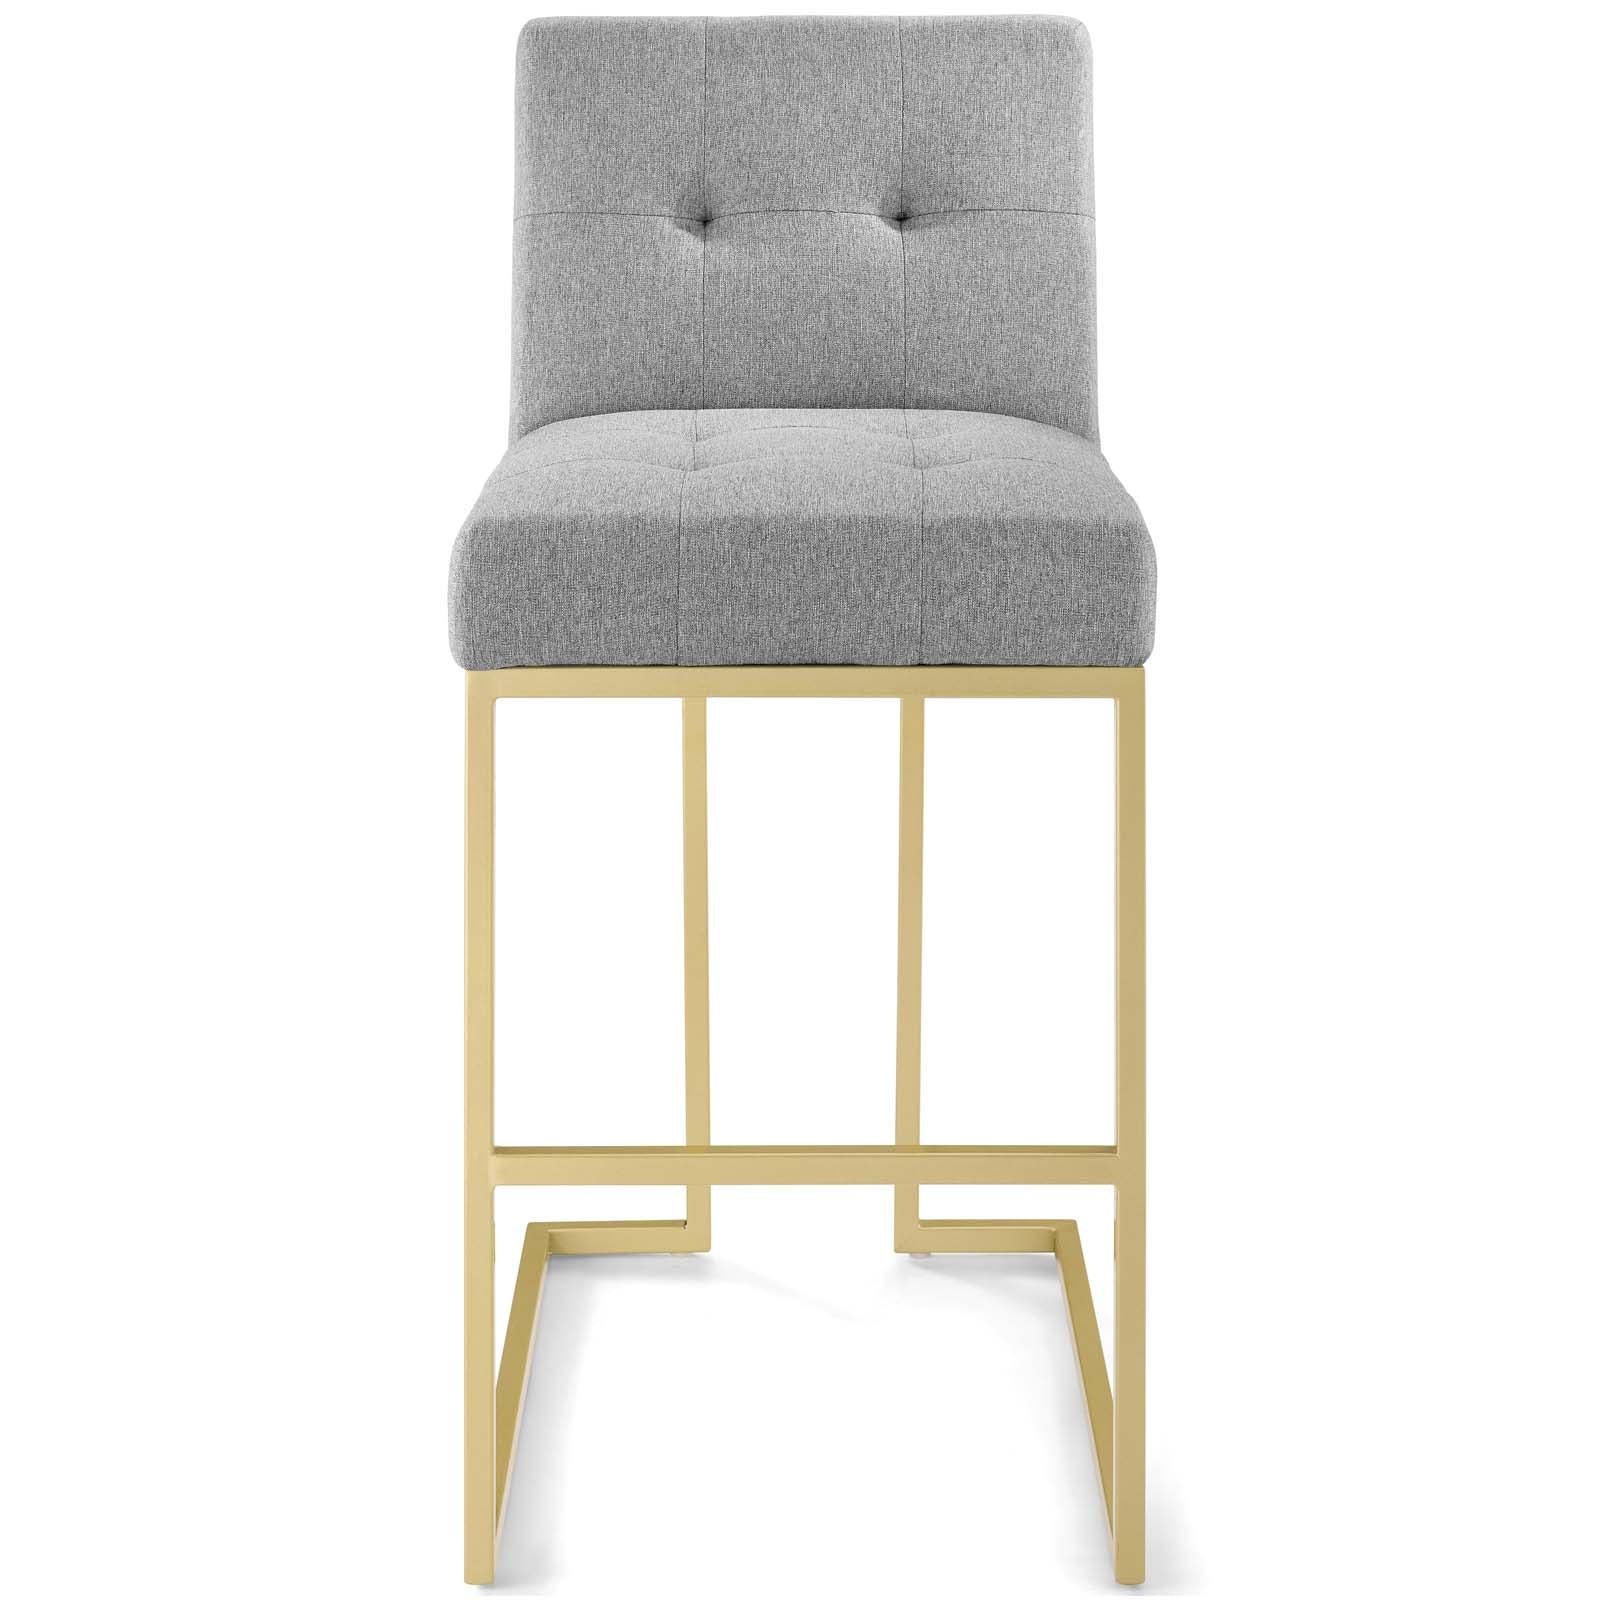 Modway Barstools - Privy Gold Stainless Steel Upholstered Fabric Bar Stool Gold Light Gray